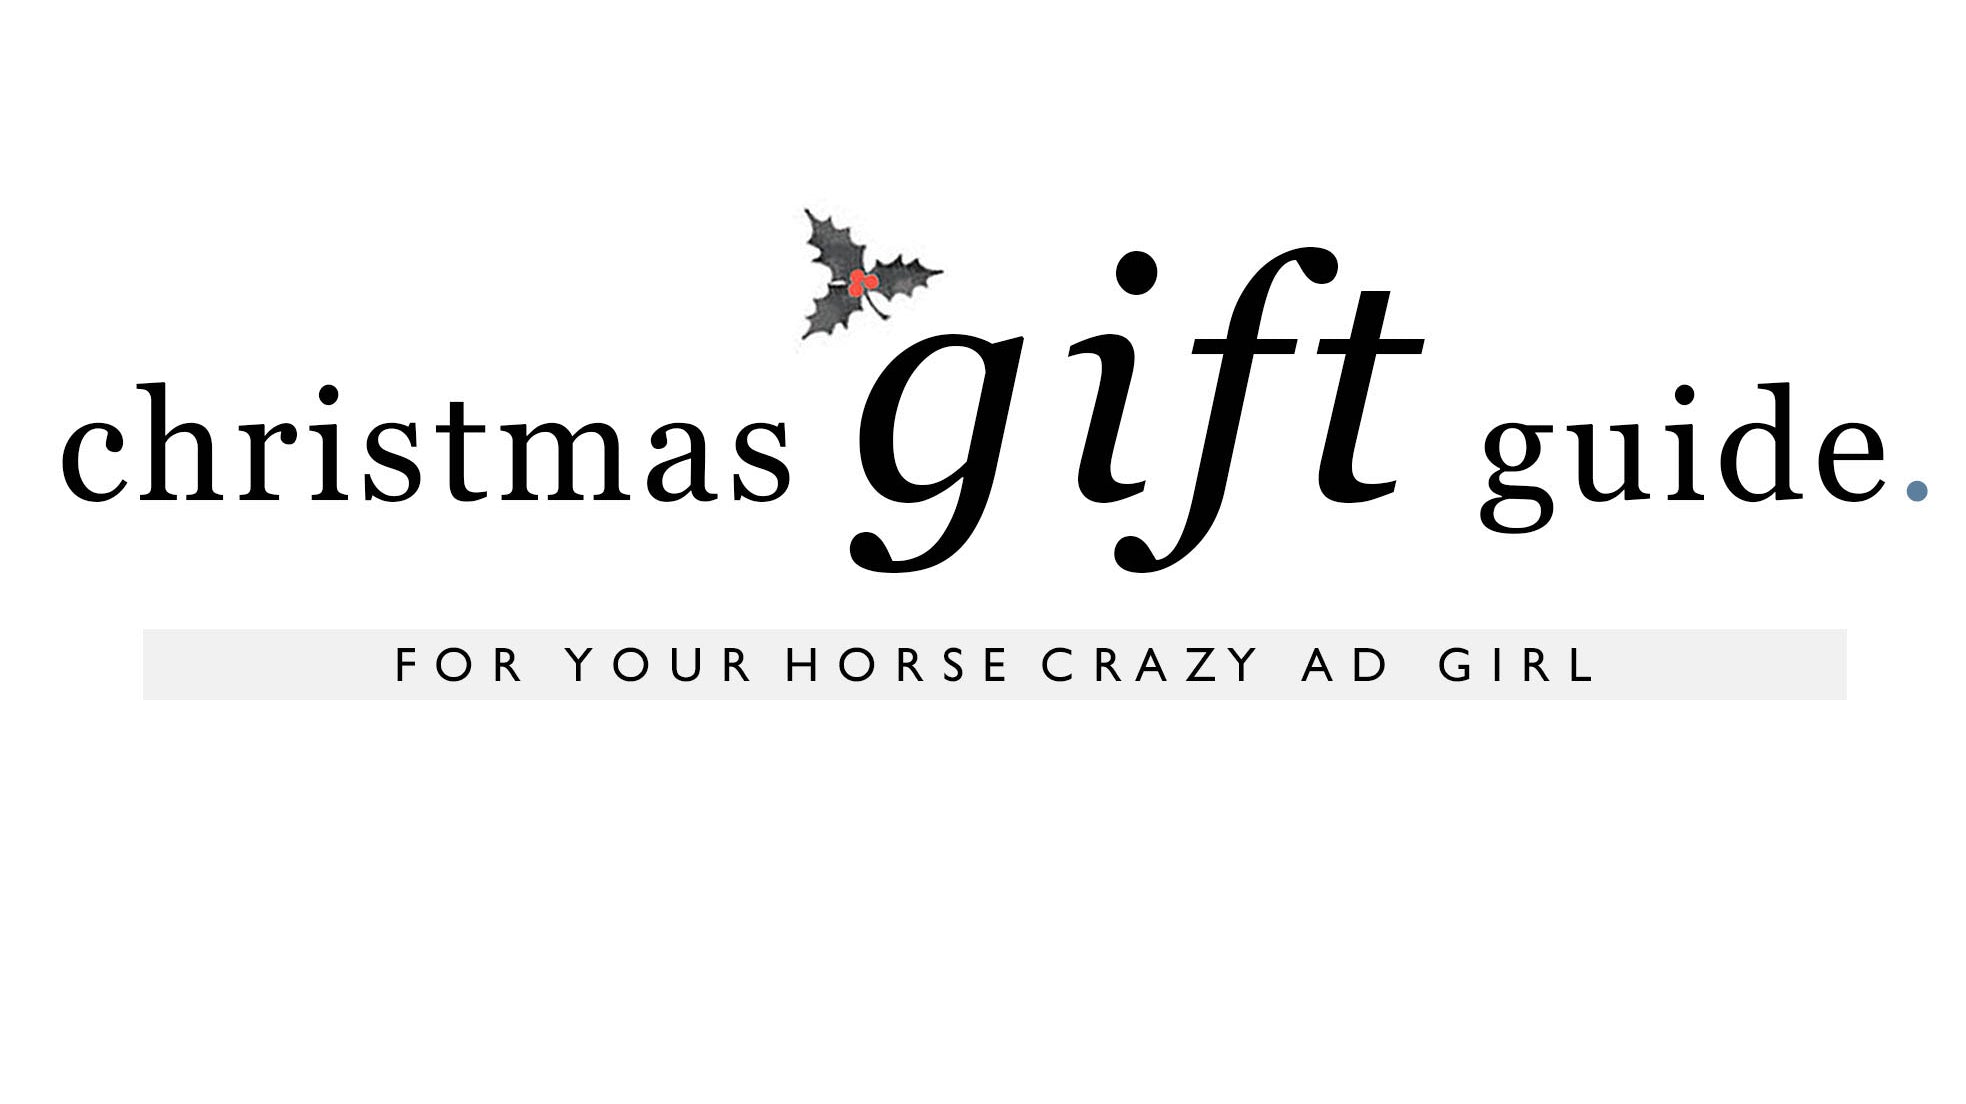 Christmas gift guide, a range of perfect gifts for an AD girl!